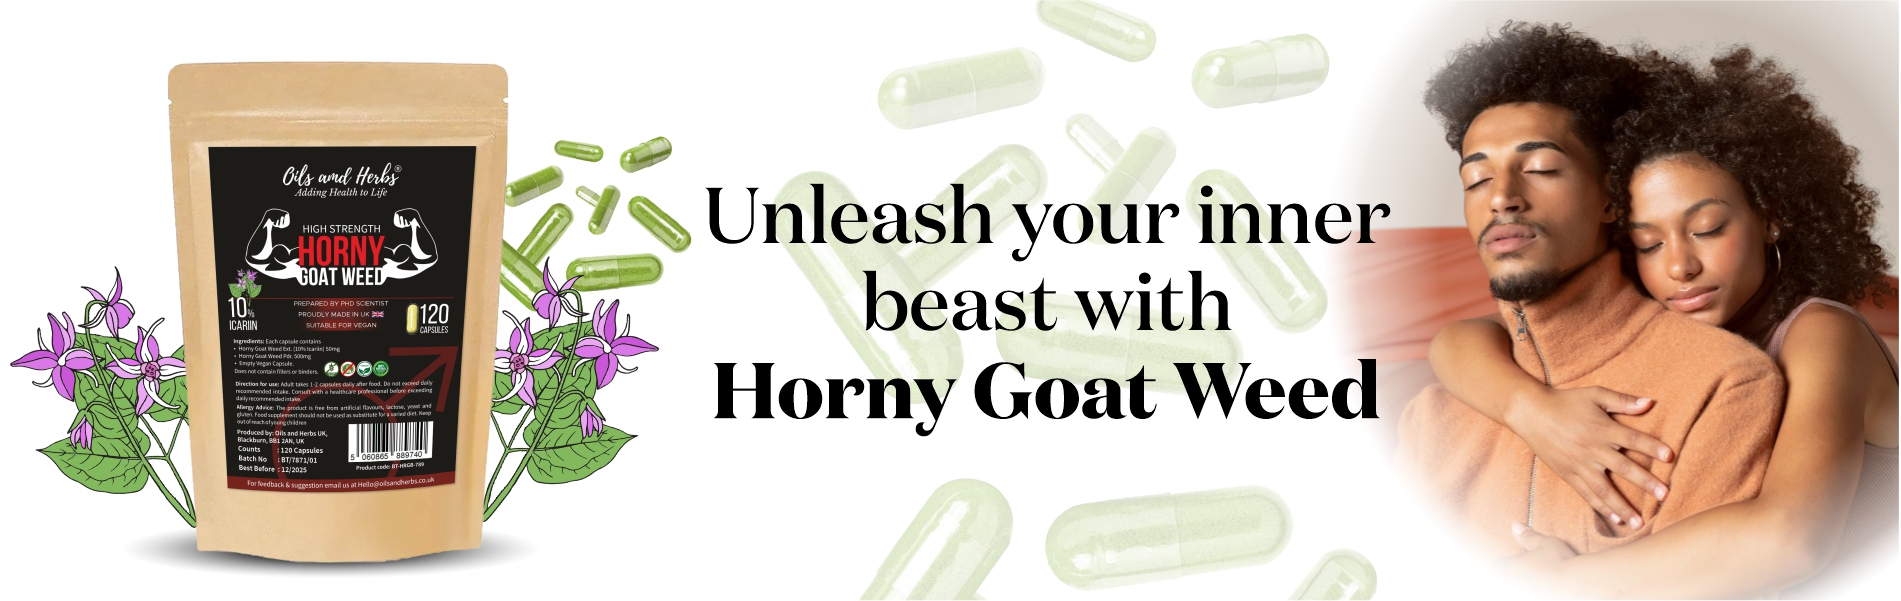 Horny goat weed capsules banner